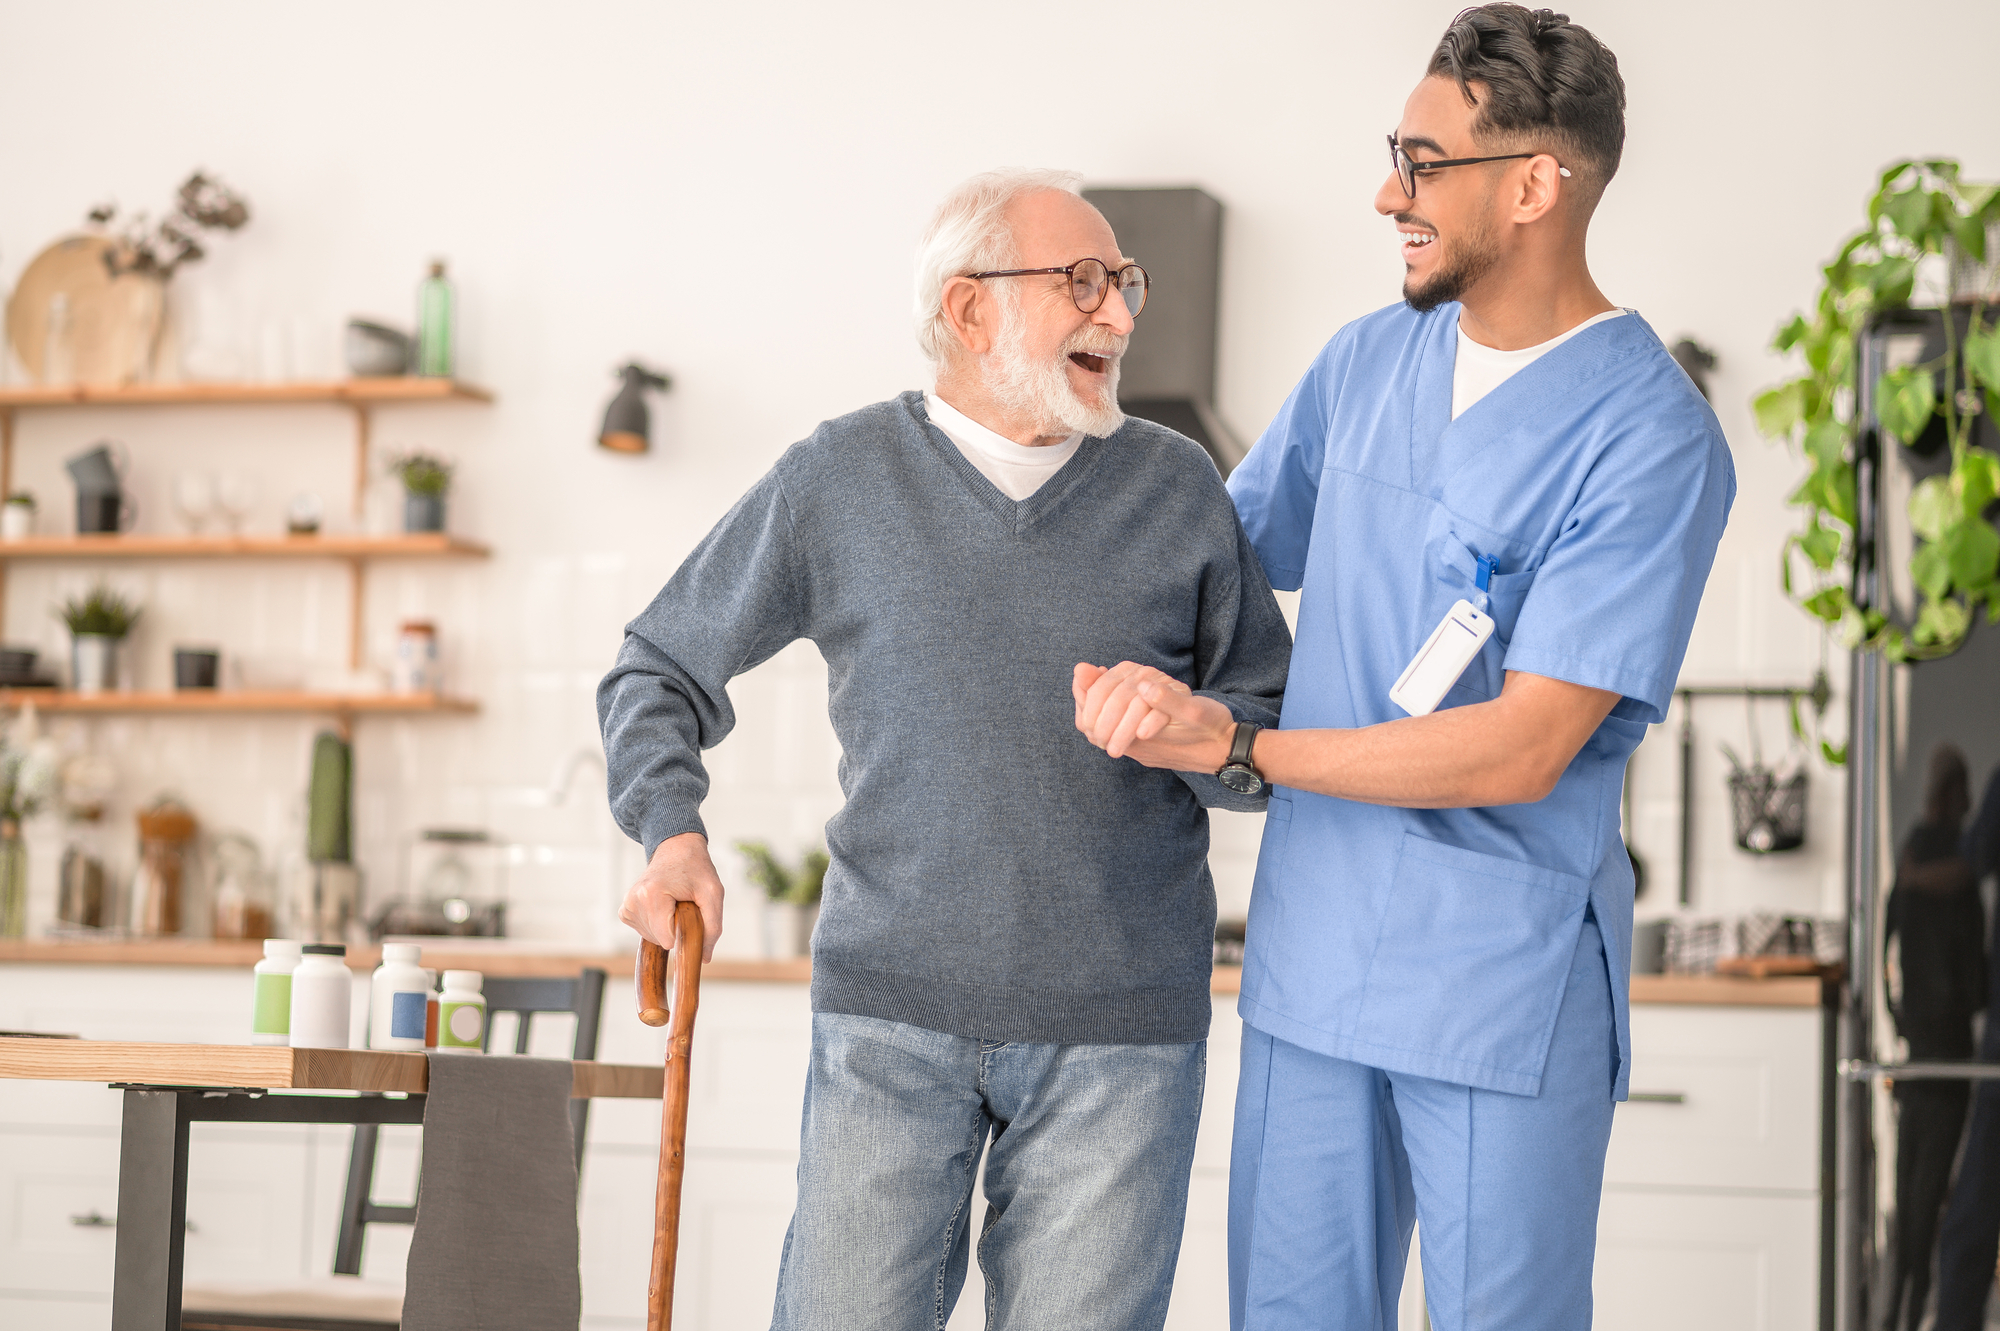 male college student wearing a blue scrub suit guiding a senior patient while working as an intern in a senior home